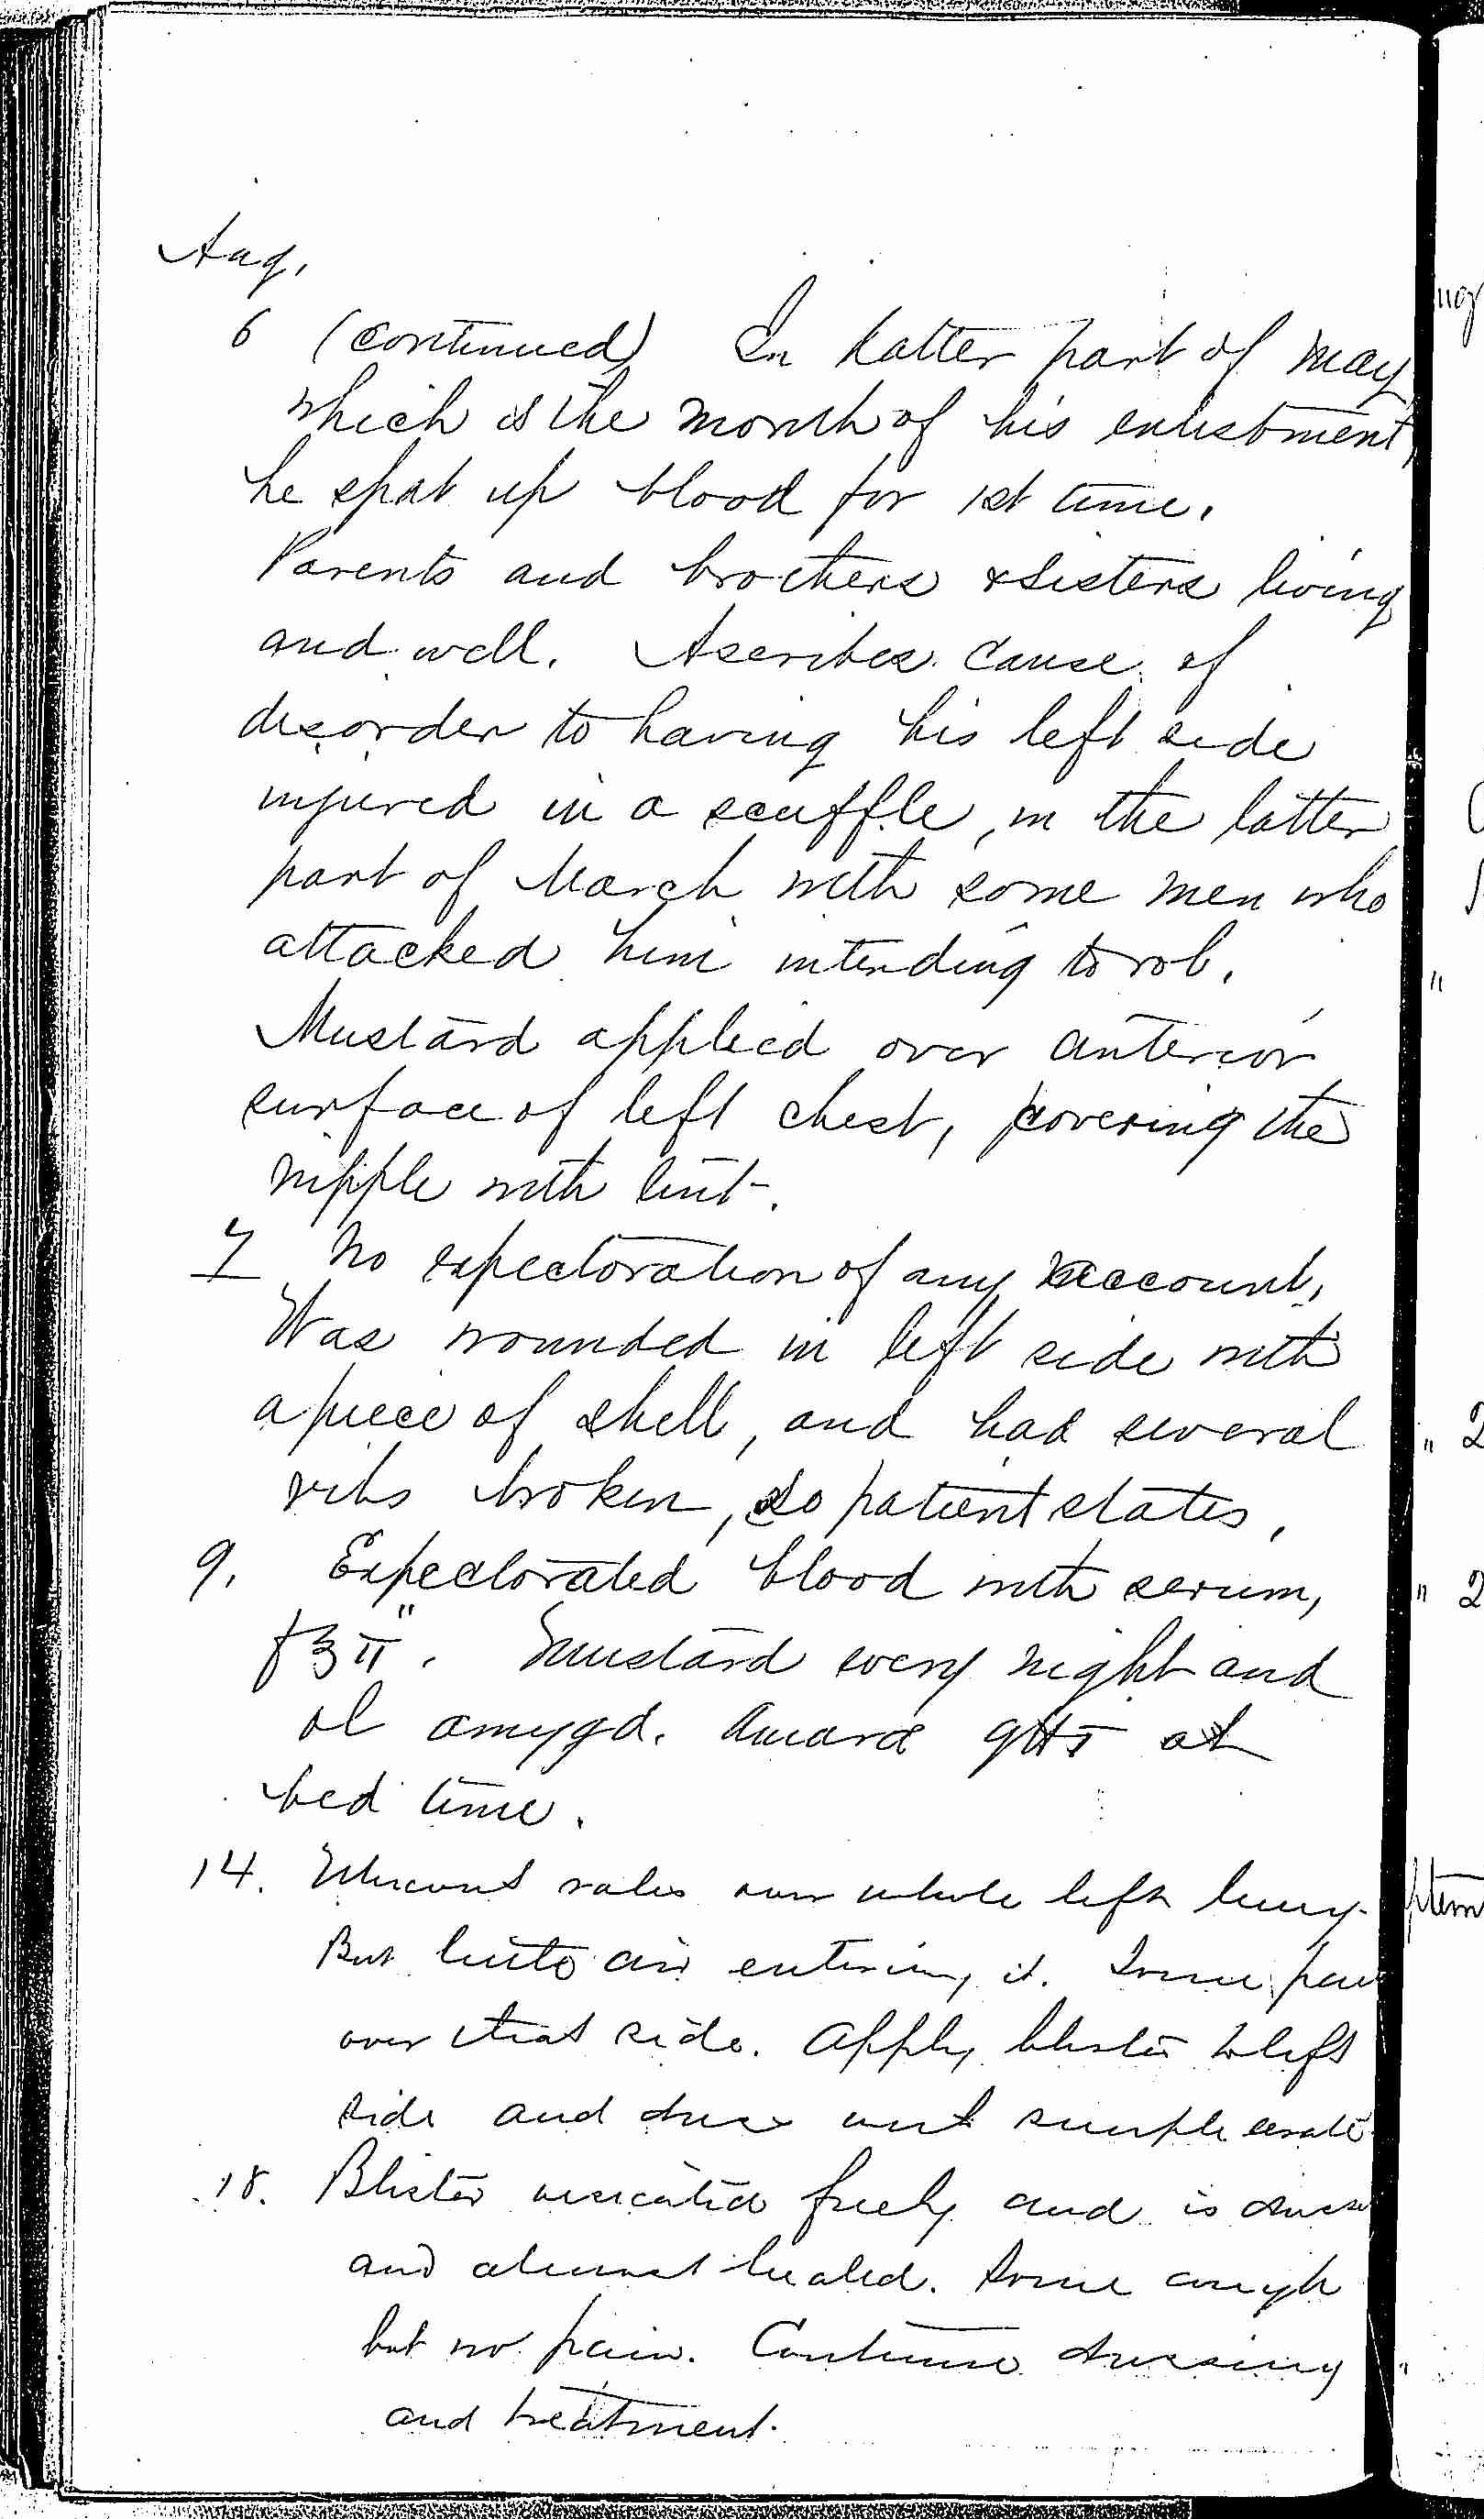 Entry for Hugh McCleary (page 2 of 4) in the log Hospital Tickets and Case Papers - Naval Hospital - Washington, D.C. - 1868-69